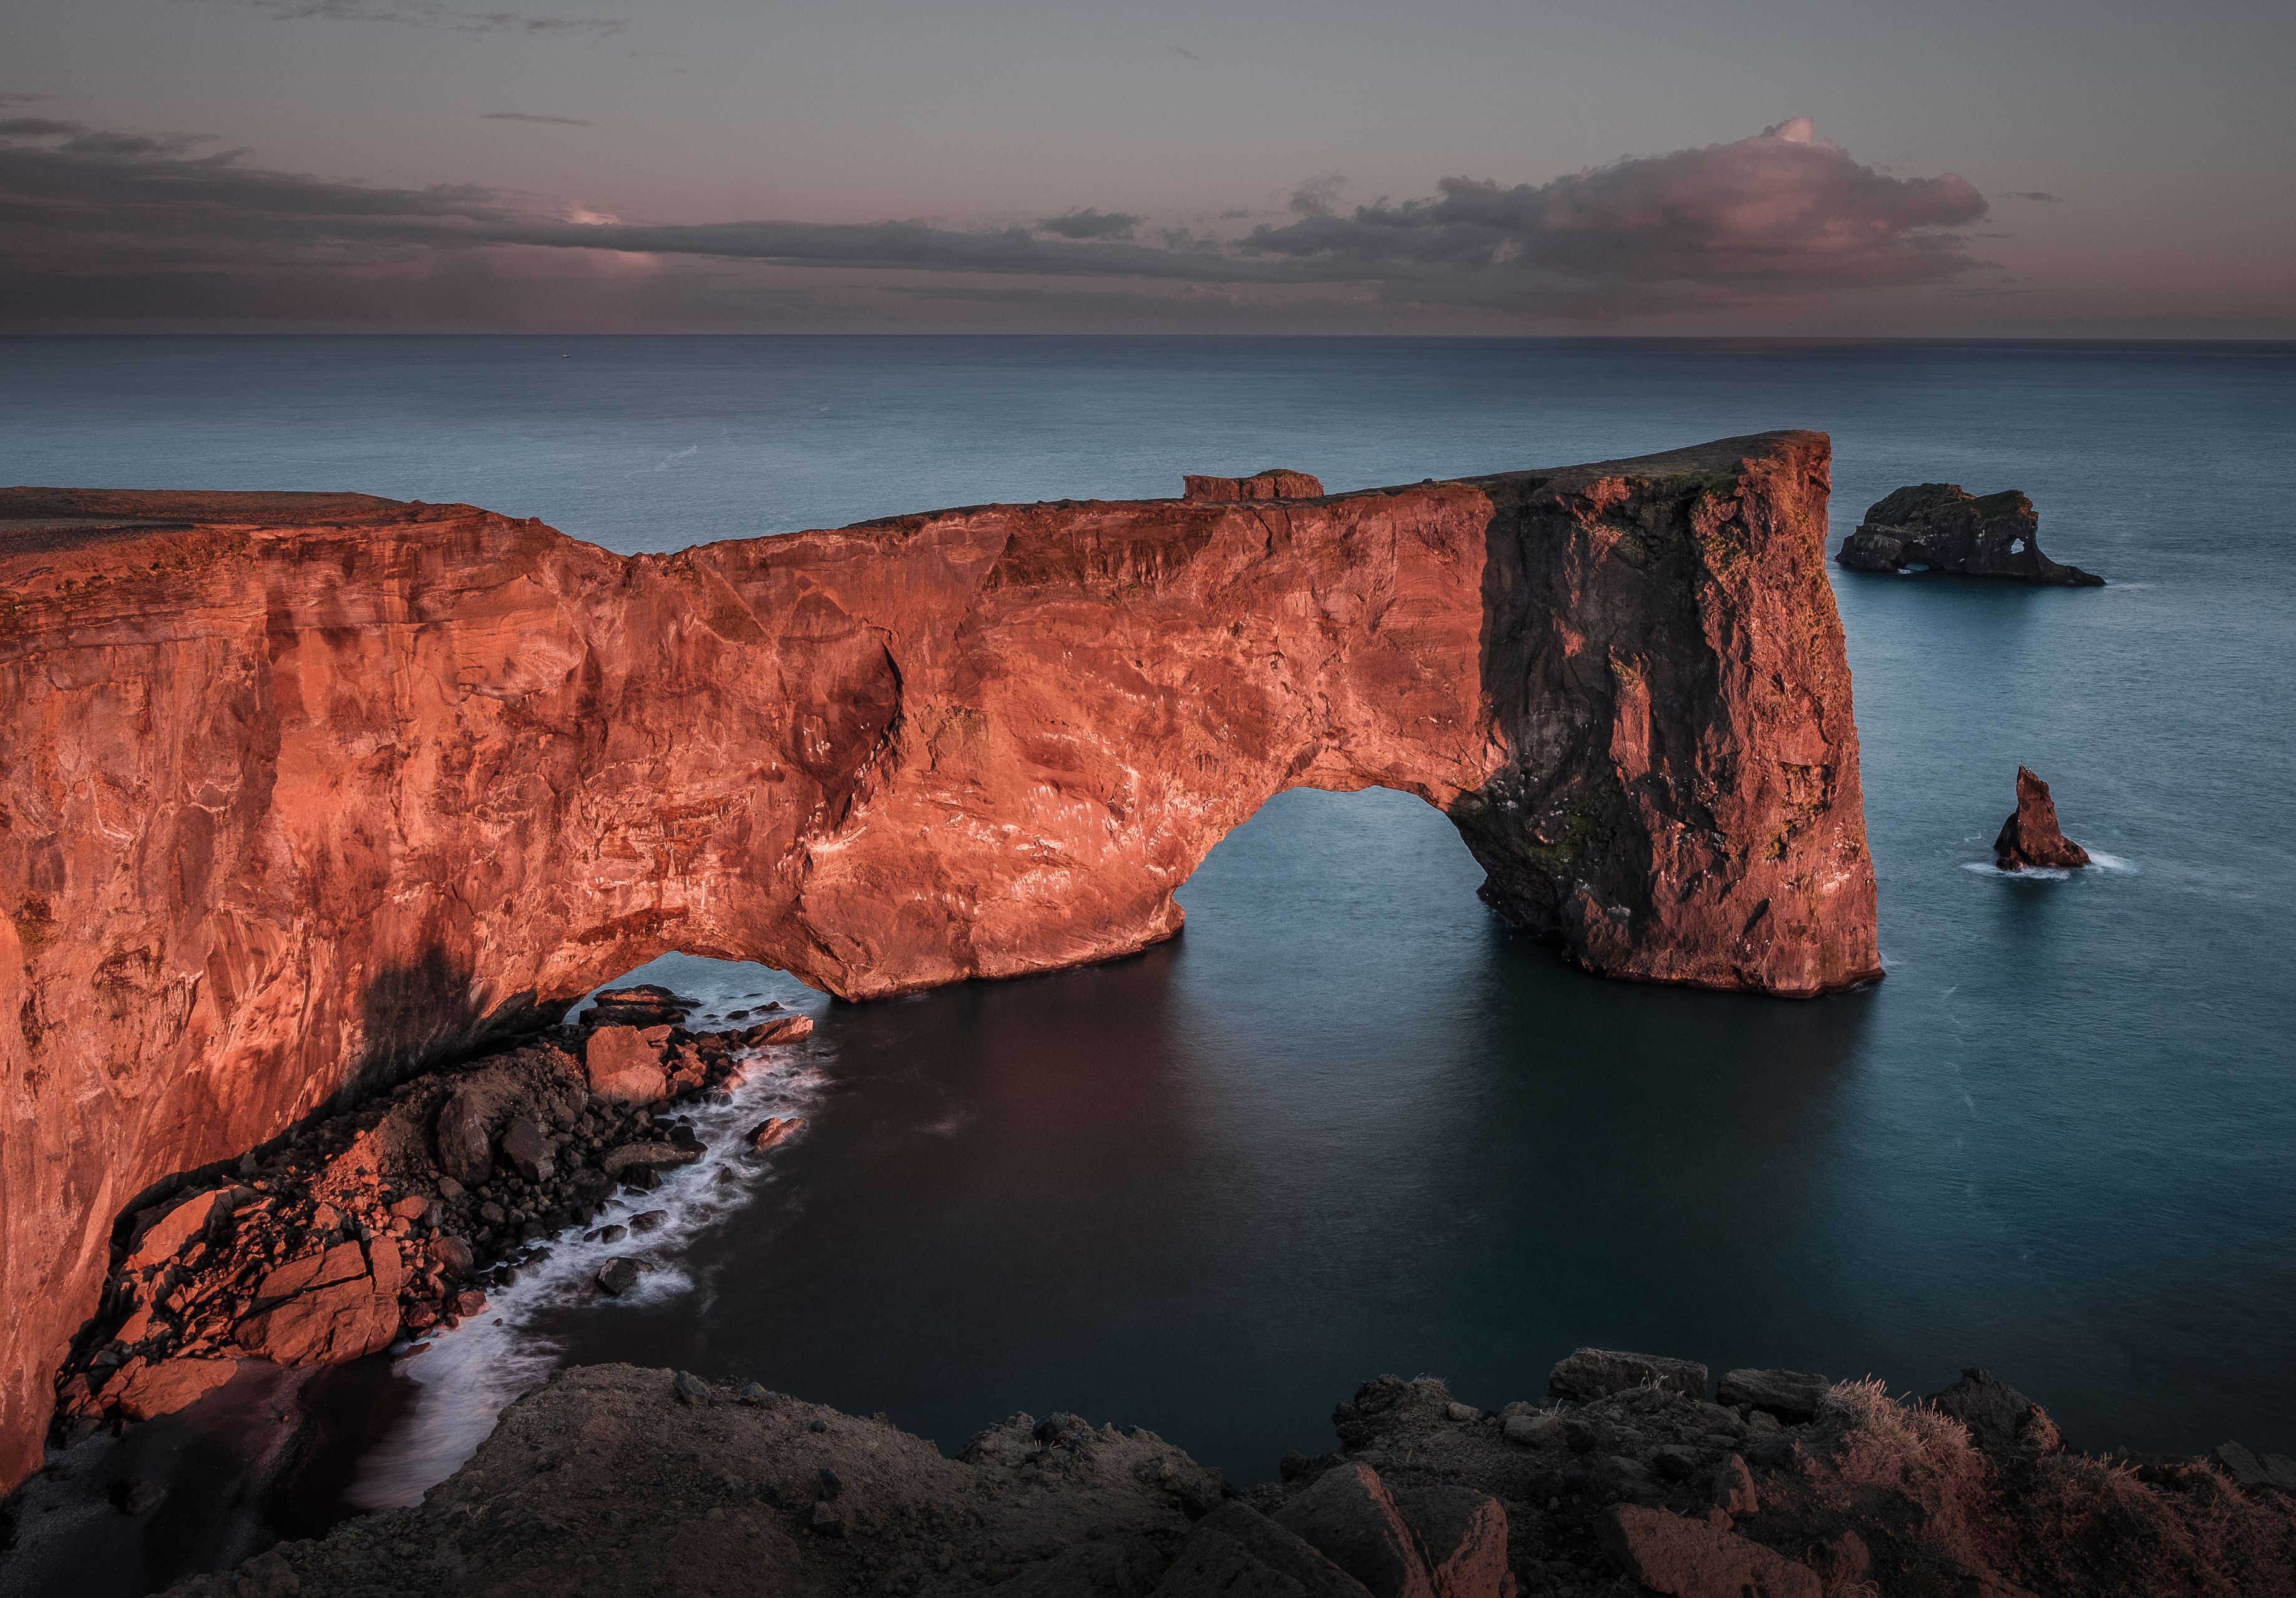 view on the beautiful rock arch at Dyrholaey, Iceland. Dyrholaey means the hill island with the door hole